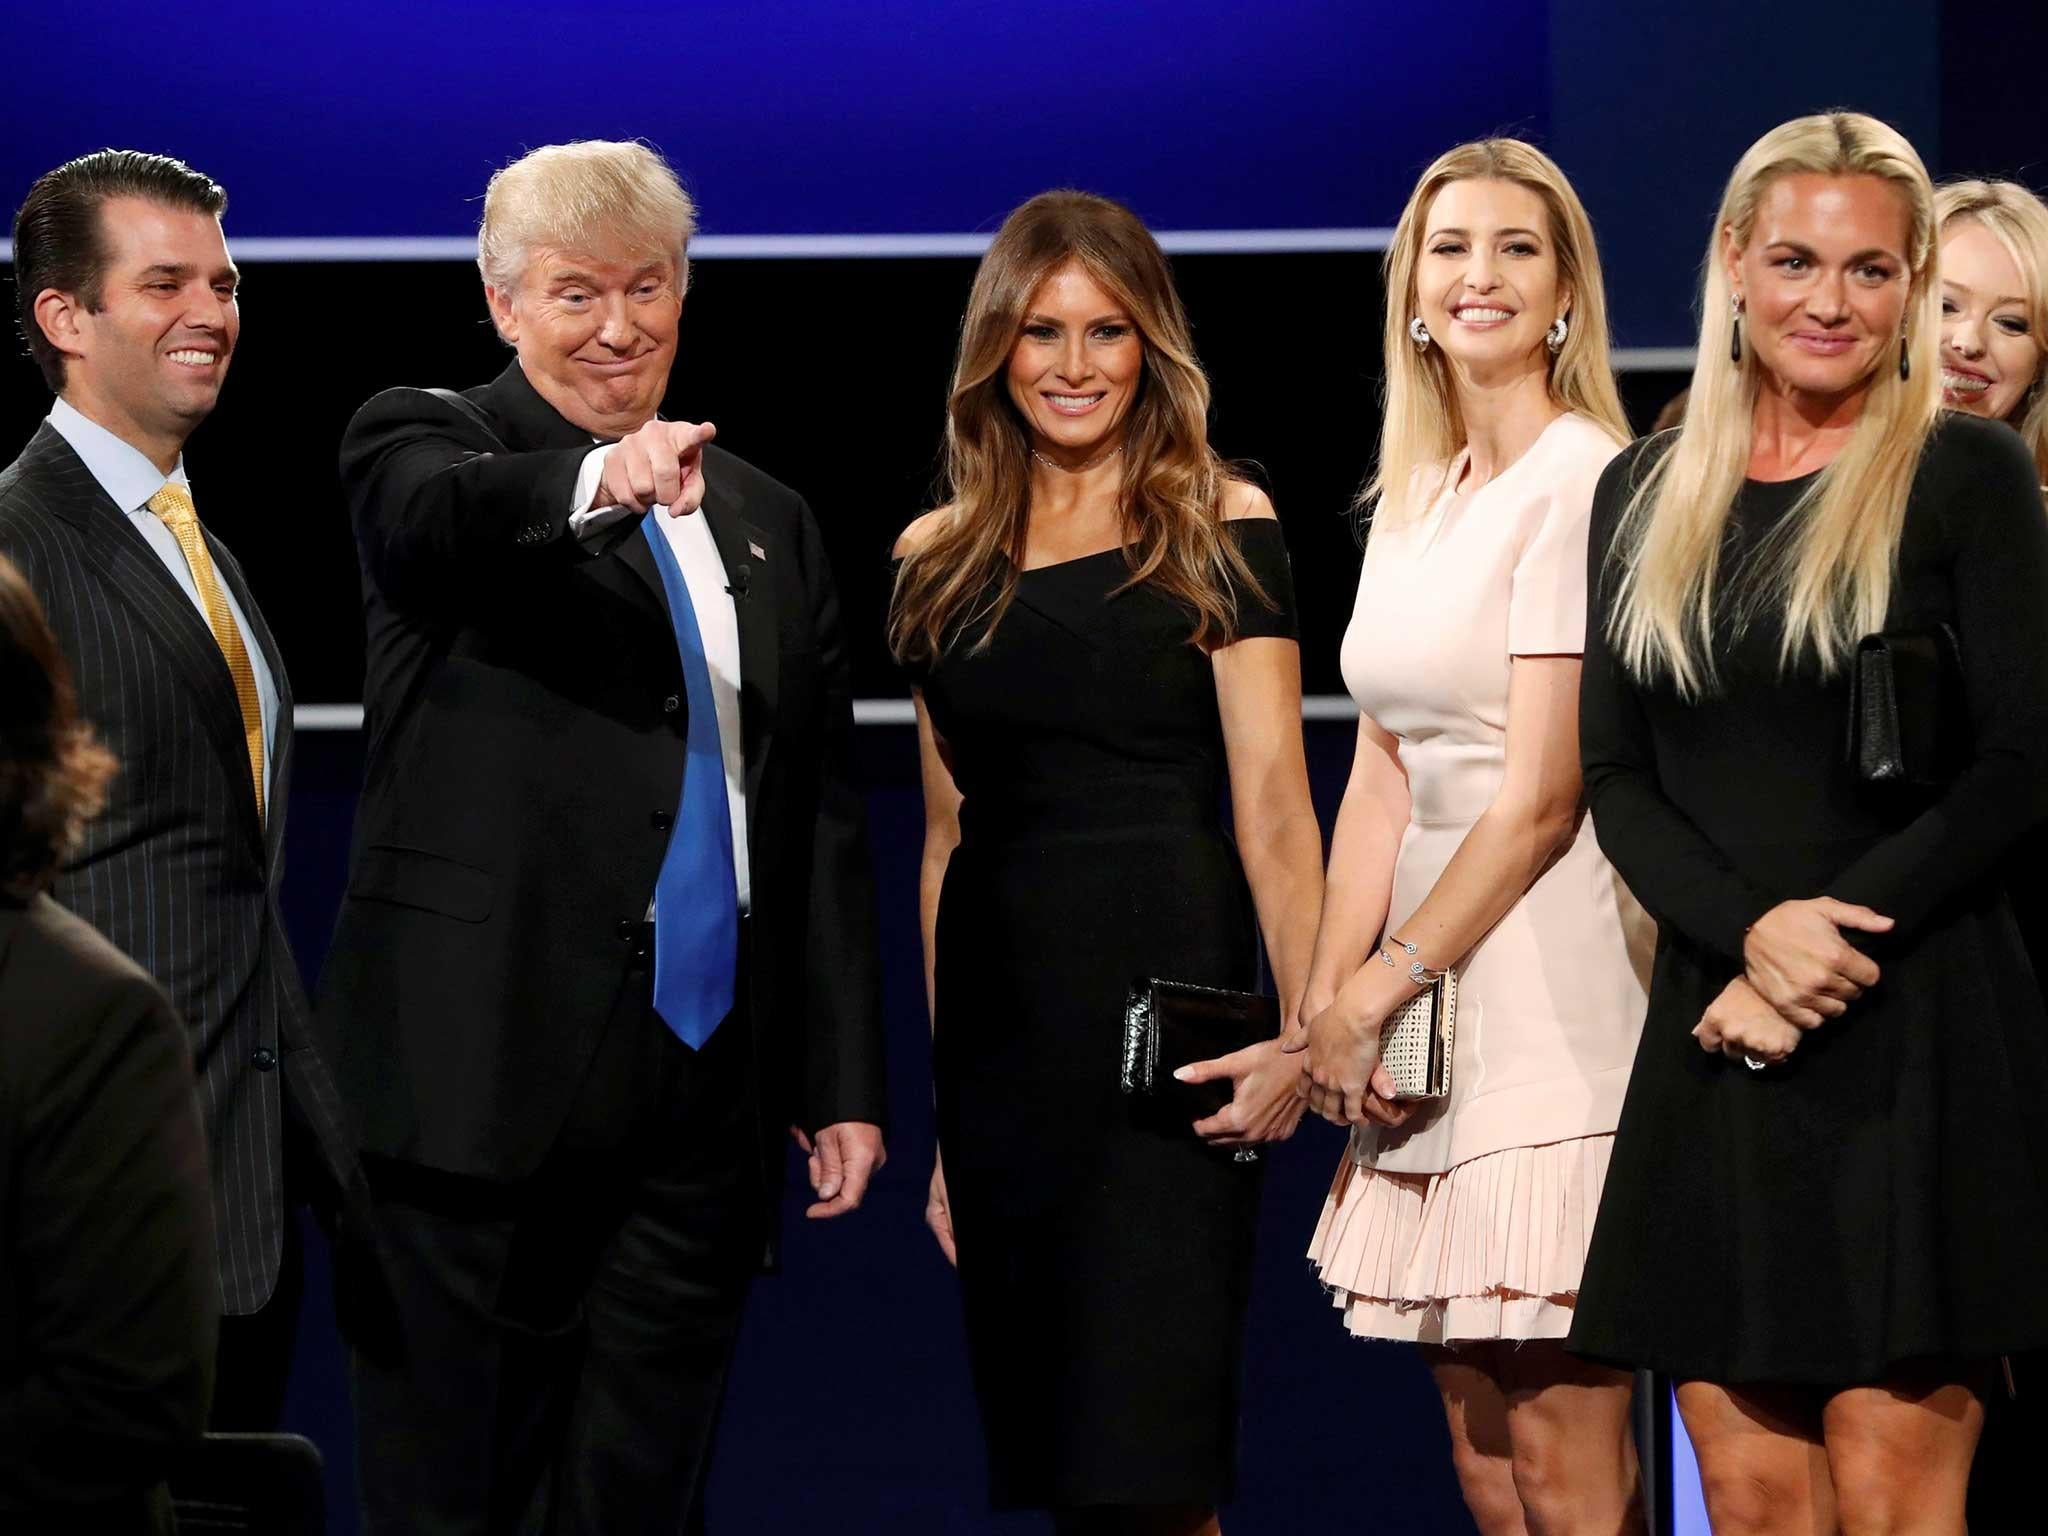 Republican presidential nominee Donald Trump stands with family members after the first presidential debate at Hofstra University in Hempstead, New York, September 26, 2016